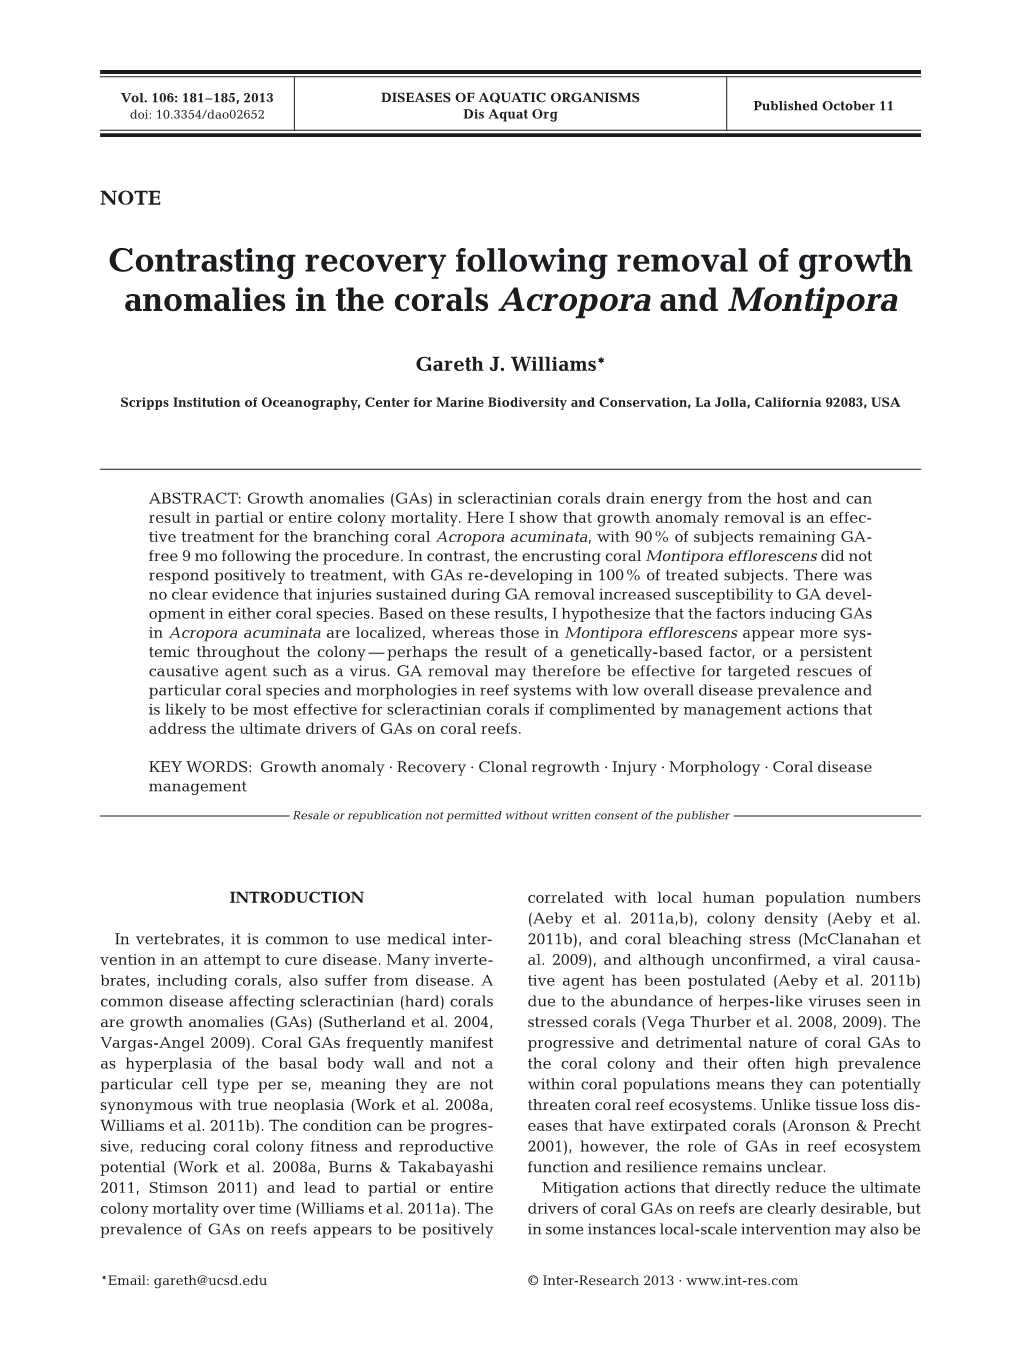 Contrasting Recovery Following Removal of Growth Anomalies in the Corals Acropora and Montipora